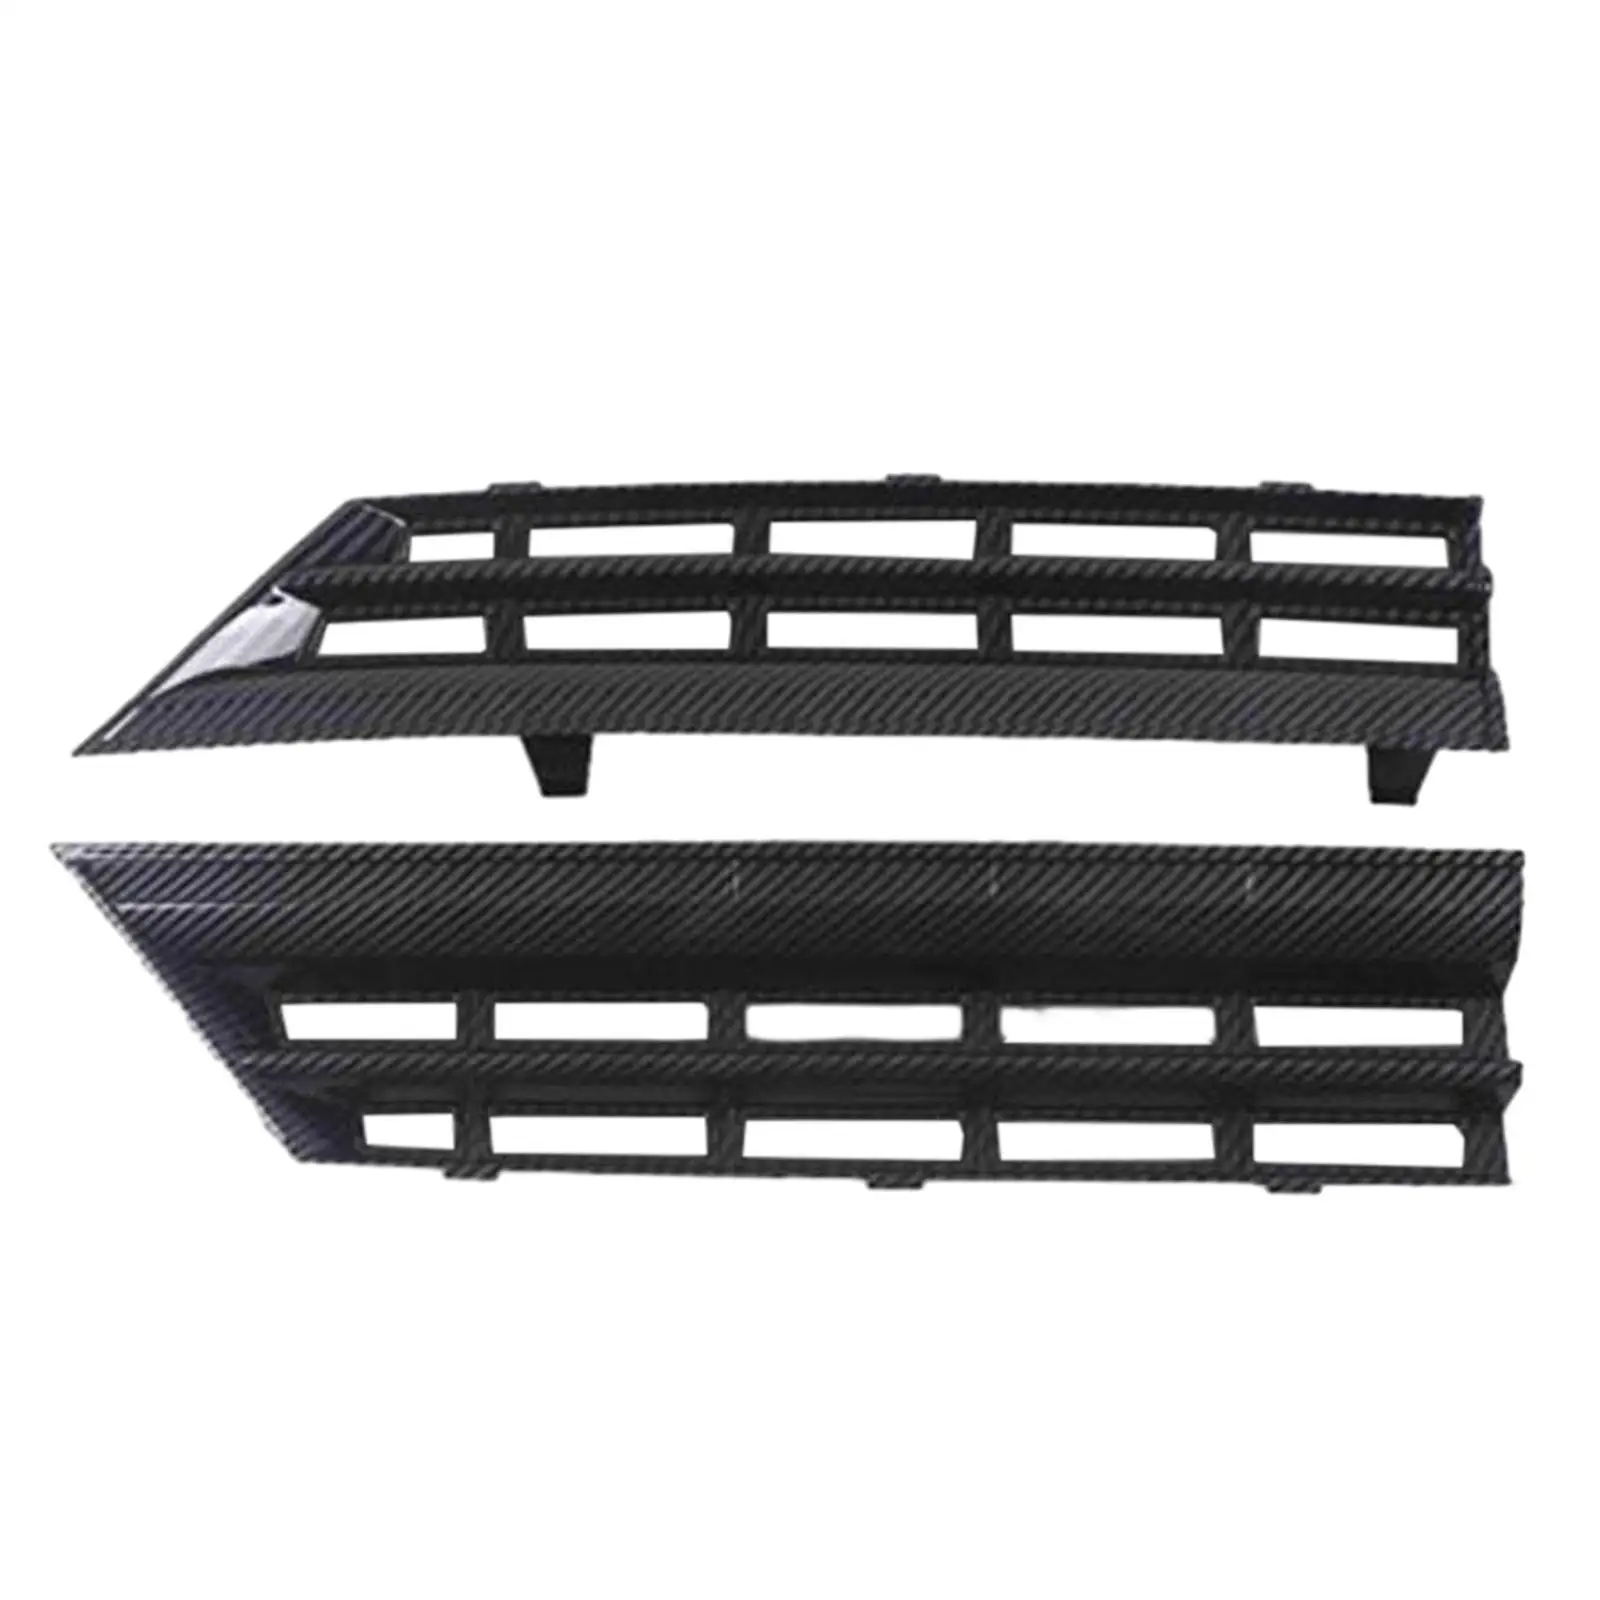 Front Grille Mesh High Performance for Byd Dolphin Auto Accessories